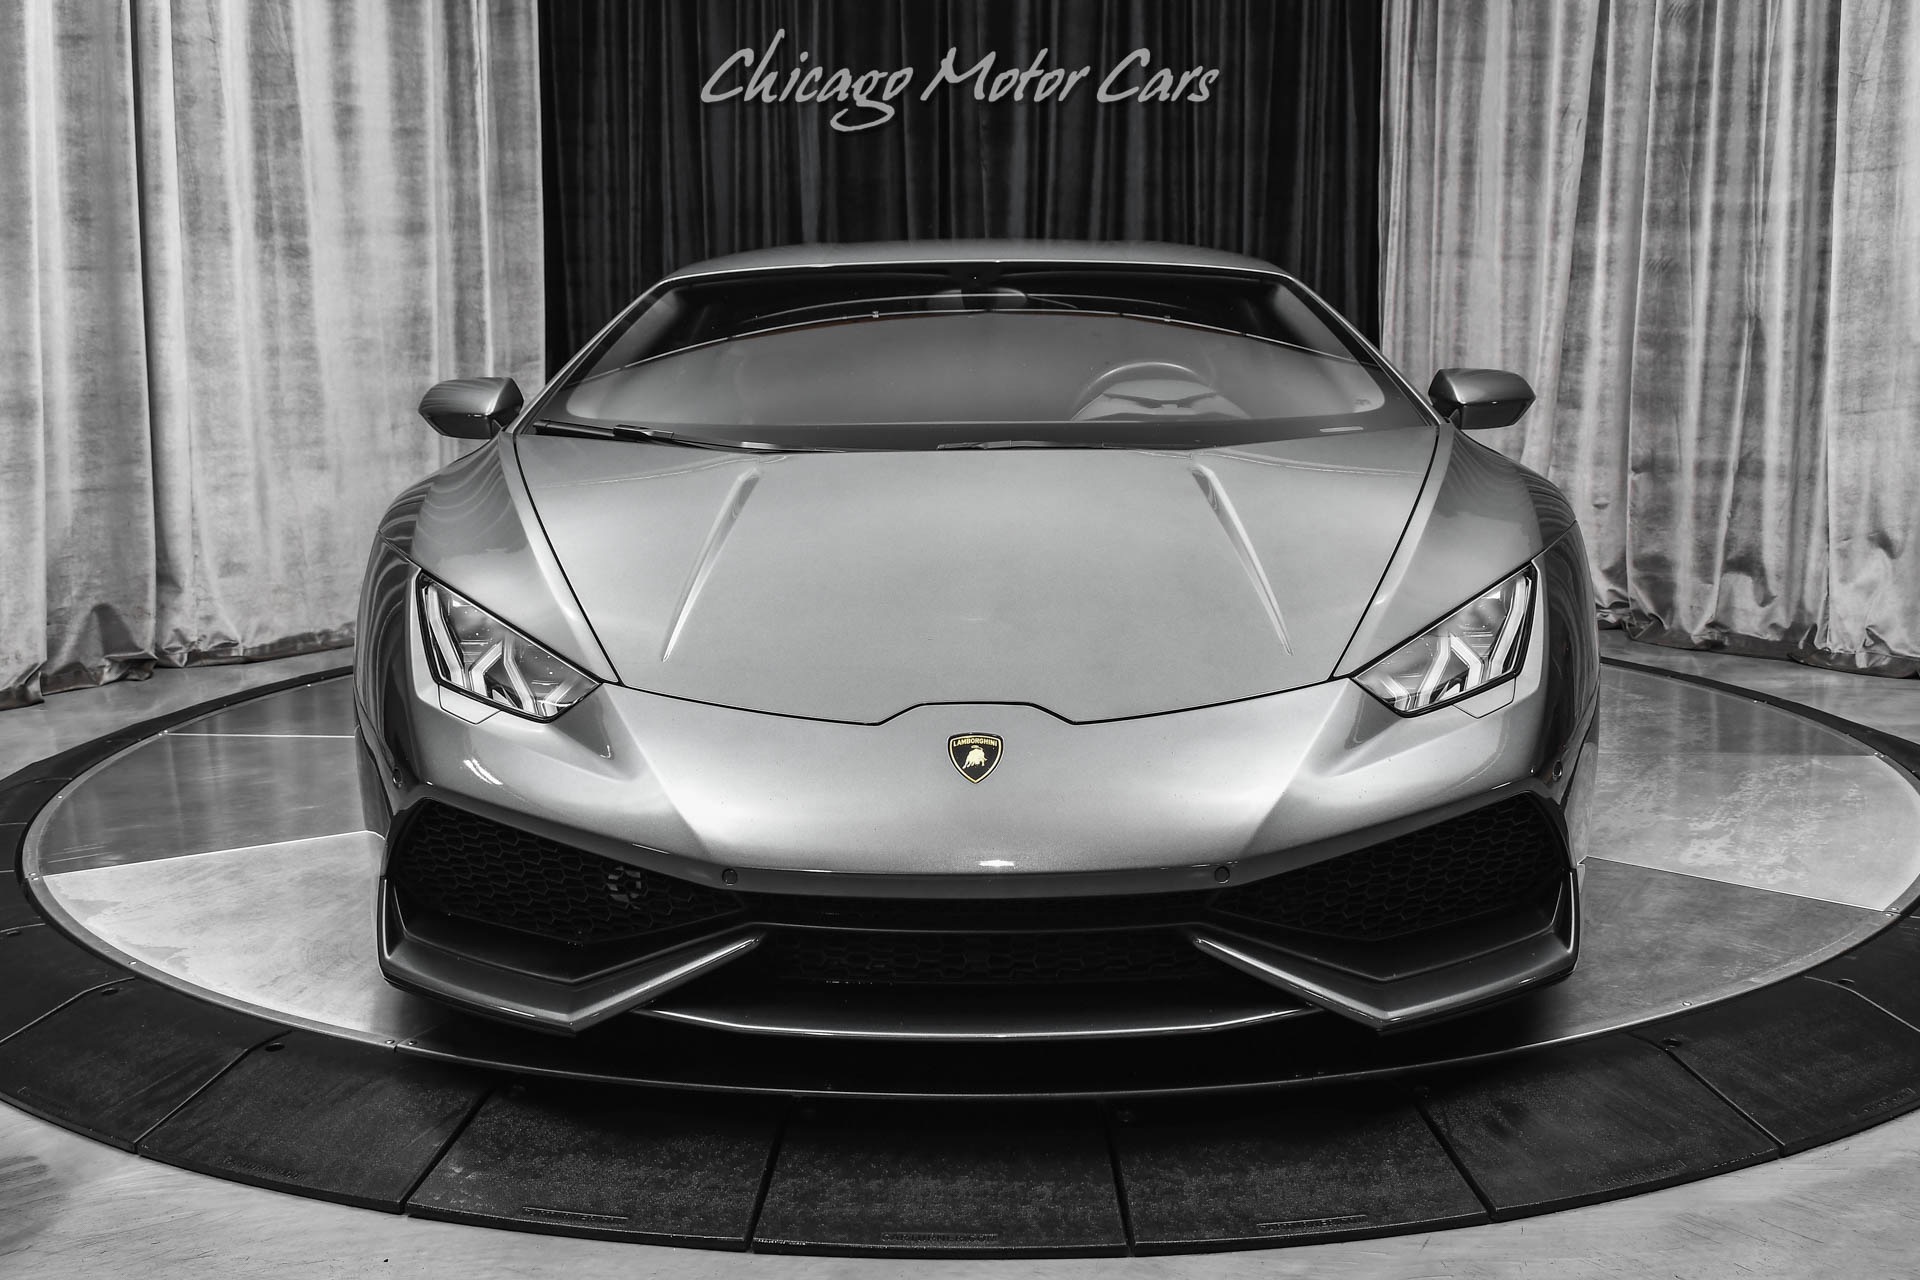 Used-2015-Lamborghini-Huracan-LP610-4-Coupe-Just-Serviced-Race-Exhaust-Front-Lift-TEB--Forged-Carbon